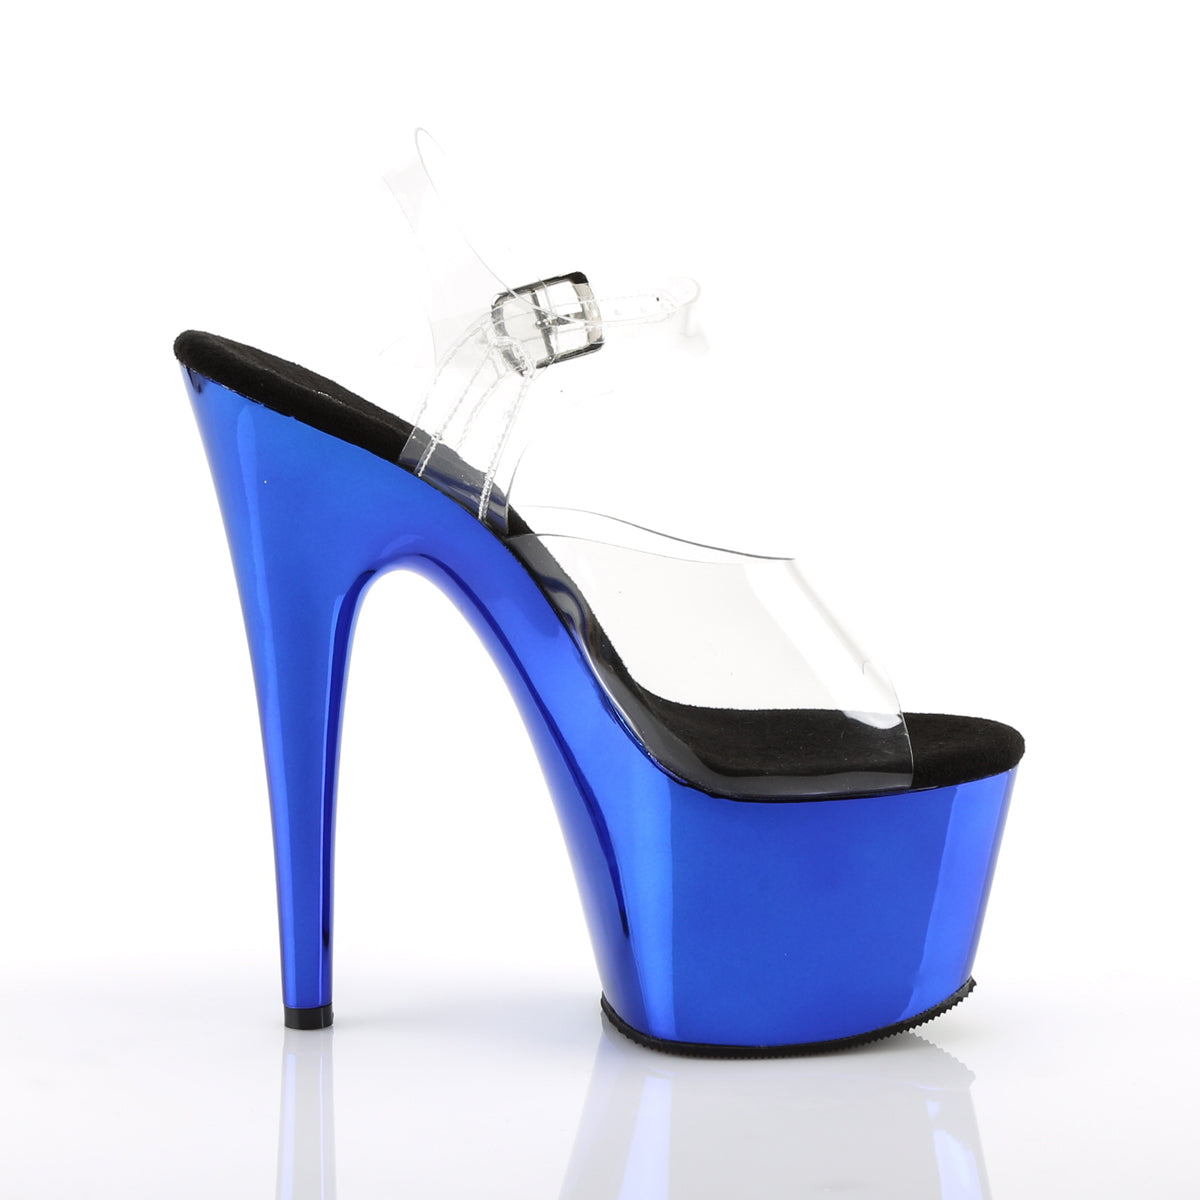 ADORE-708 7" Heel Clear and Blue Chrome Sexy Sandals-Pleaser- Sexy Shoes Fetish Heels